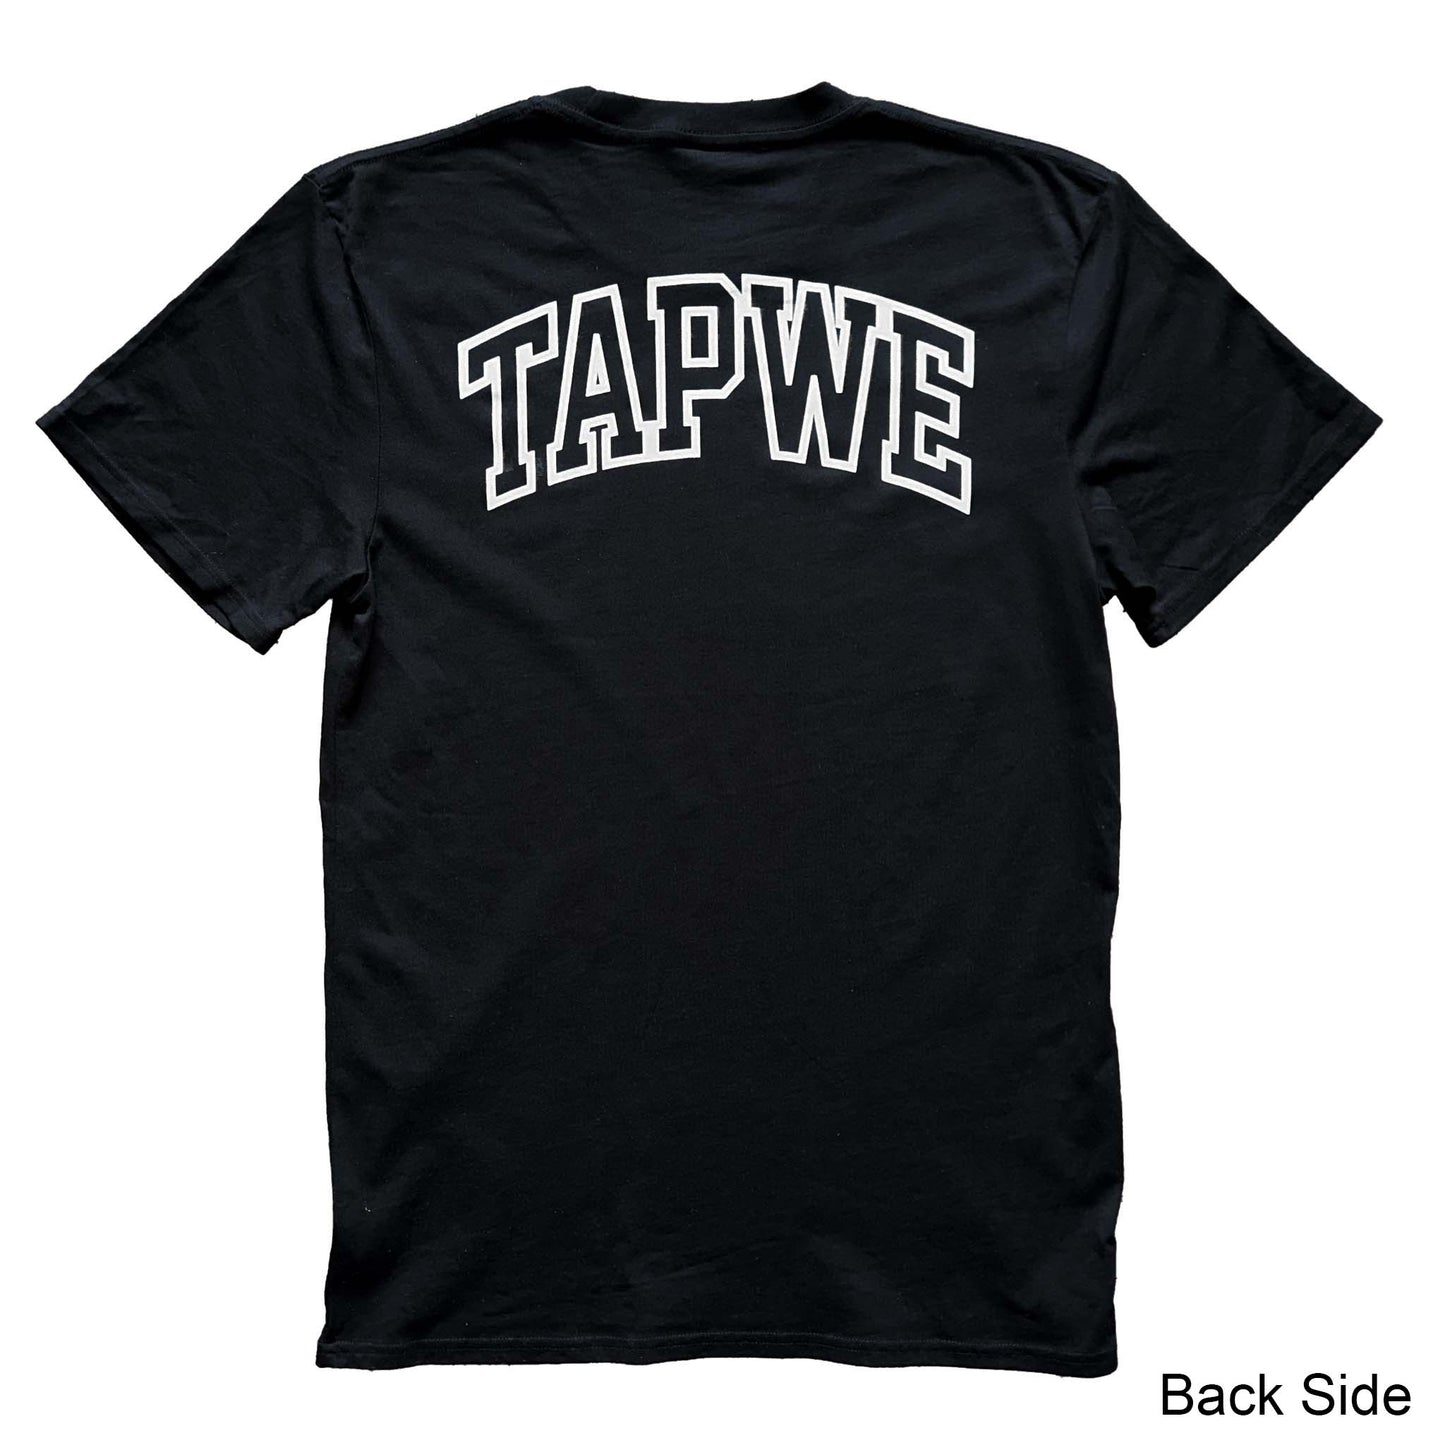 Limited Edition - 'Tapwe' Drezus T-Shirt